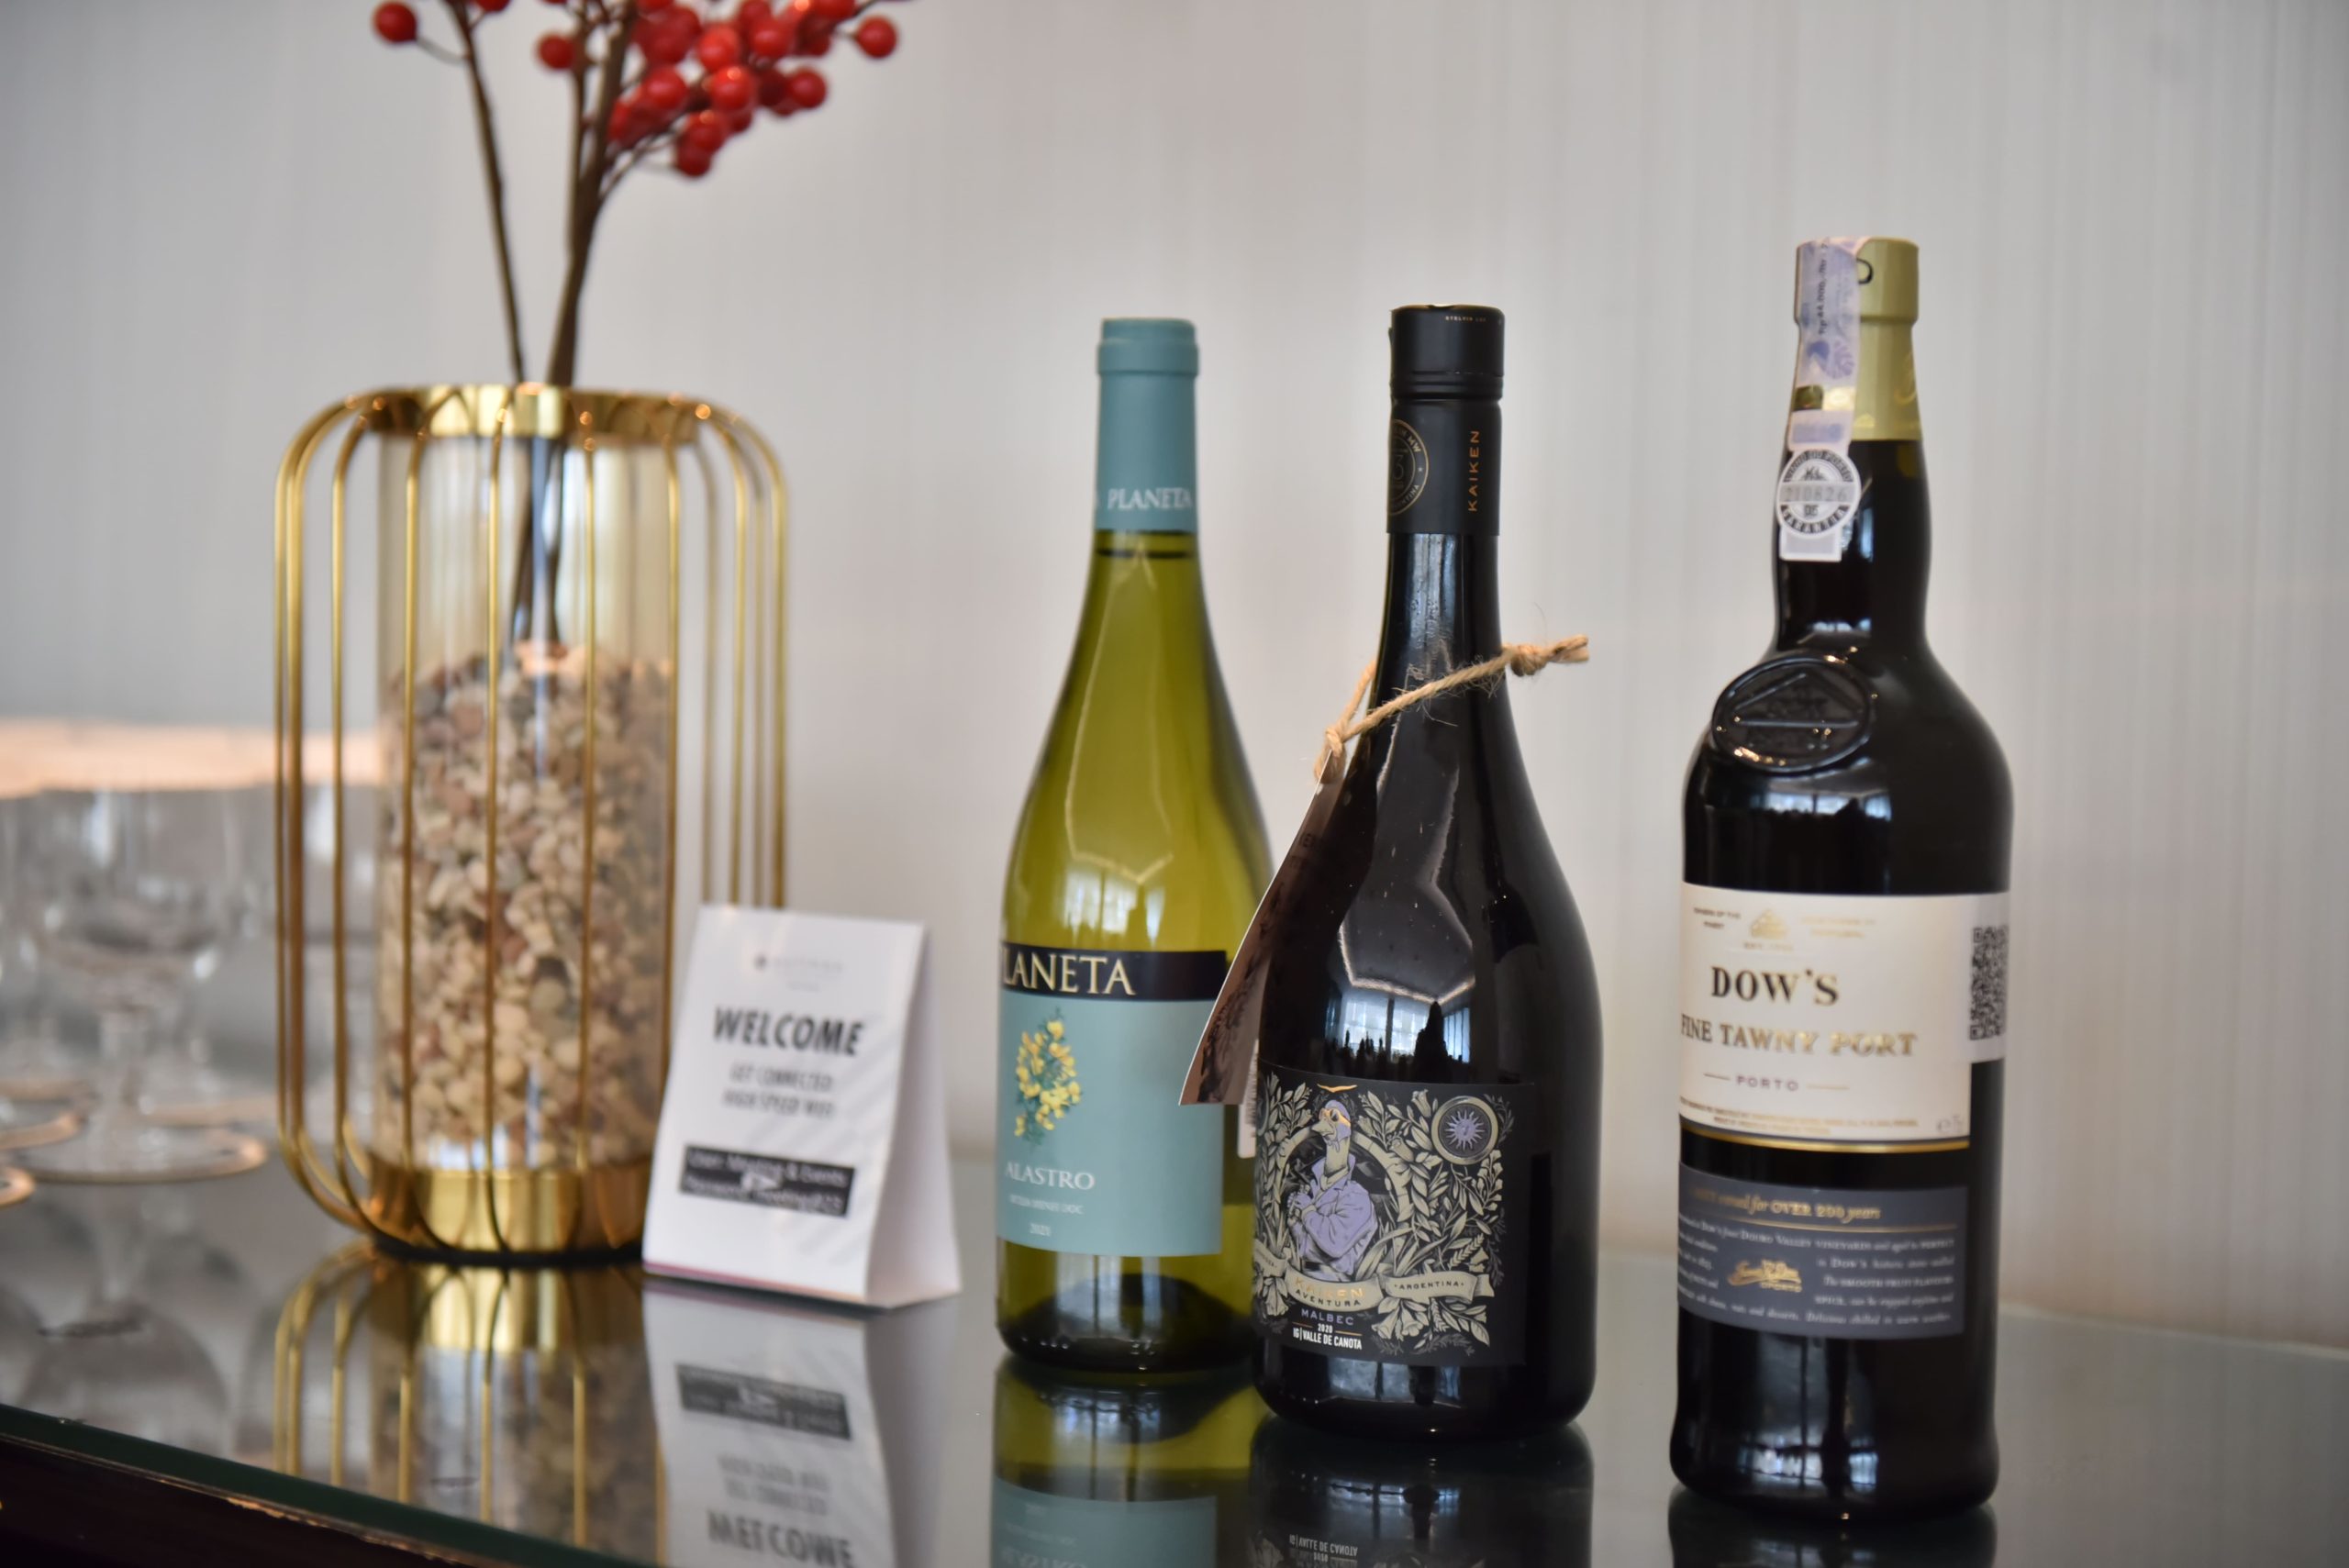 “Dimatique World of Wine” Showcases the Finest Wine Collection in Indonesia